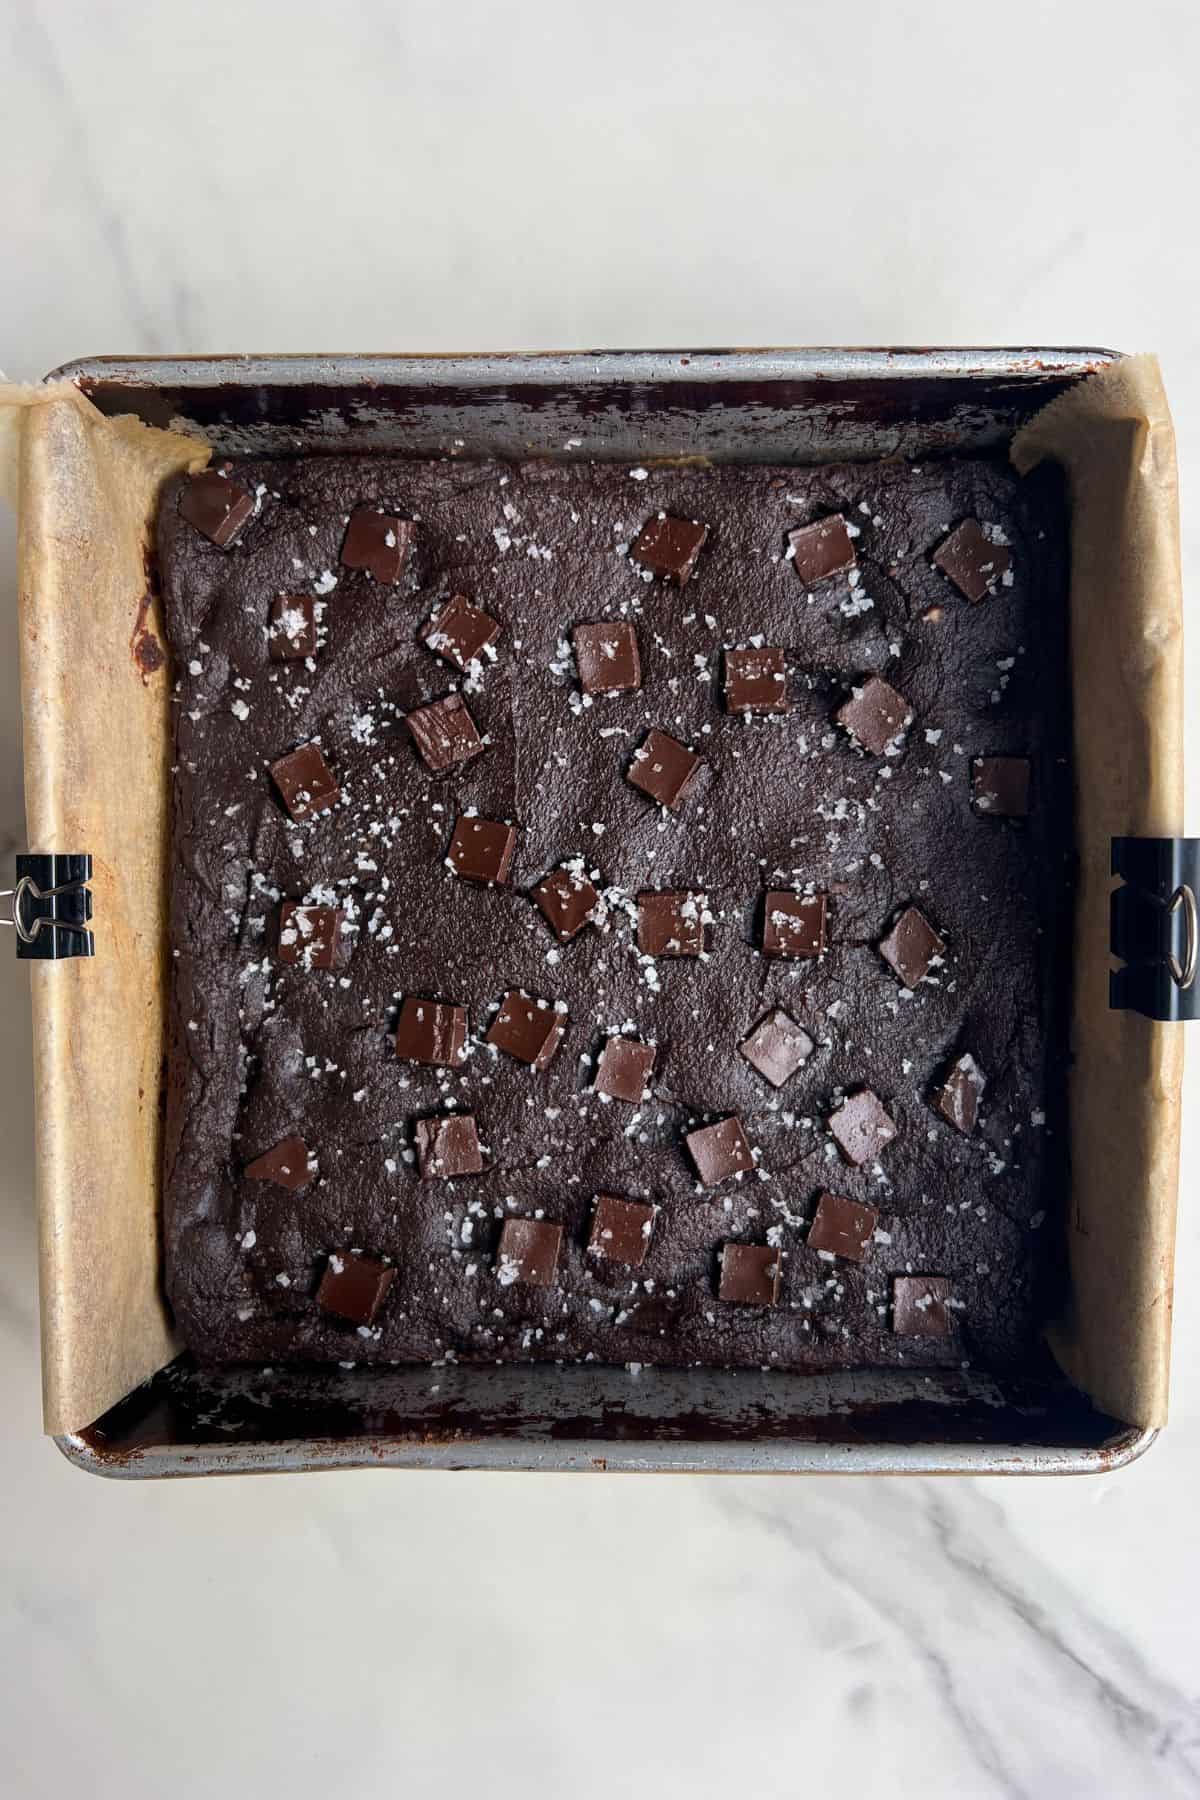 Brownies baked and topped with flaky sea salt